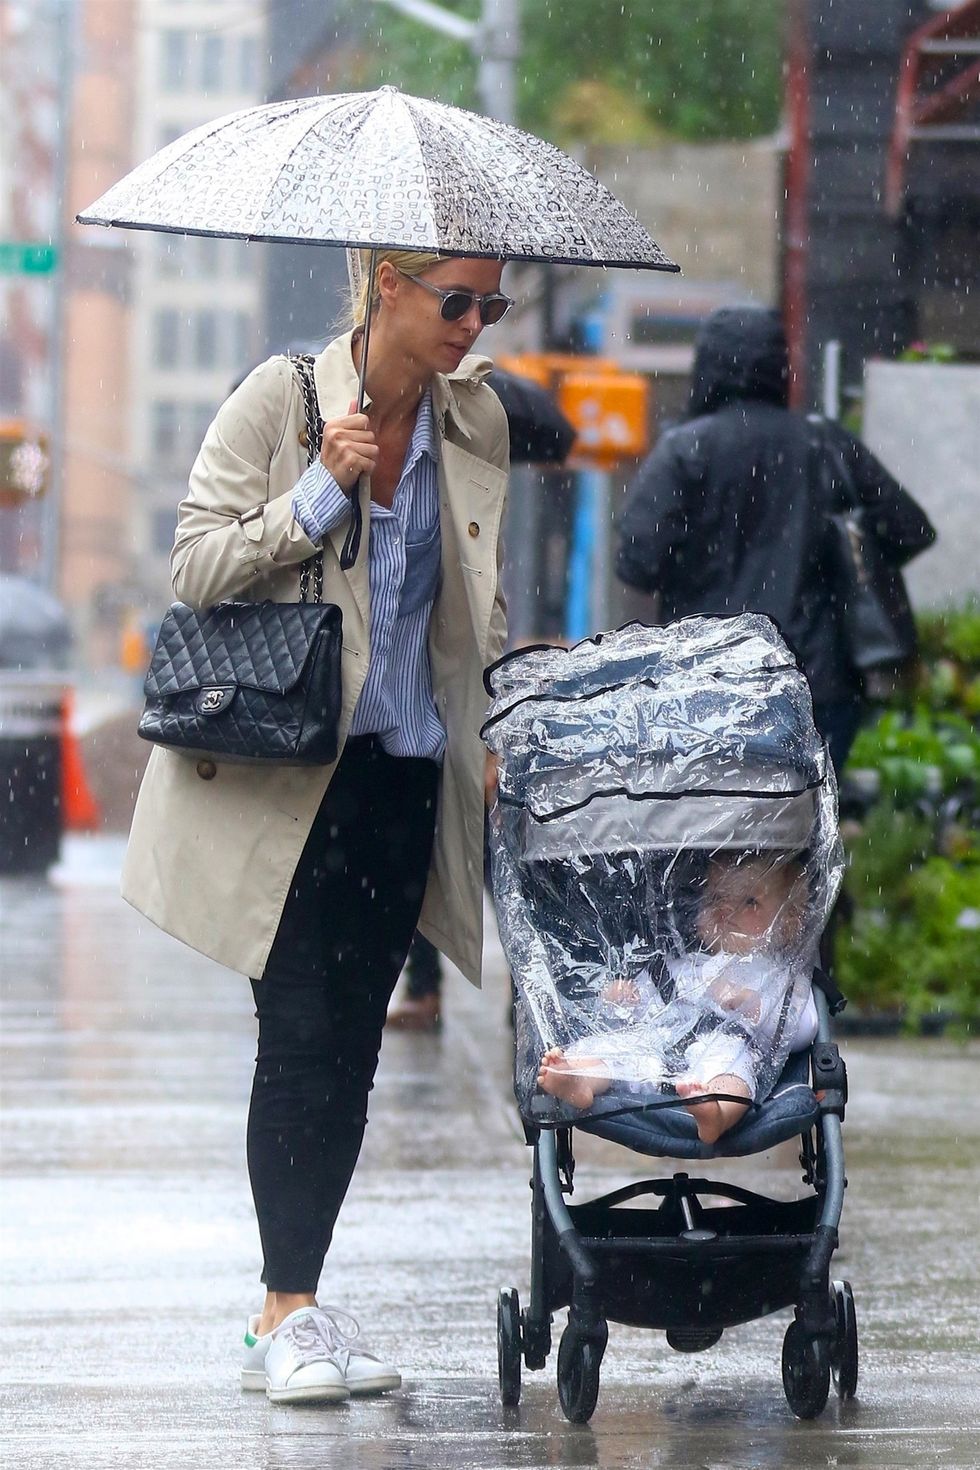 Product, Rain, Baby carriage, Fashion accessory, Outerwear, Umbrella, Walking, Street fashion, Street, Baby Products, 